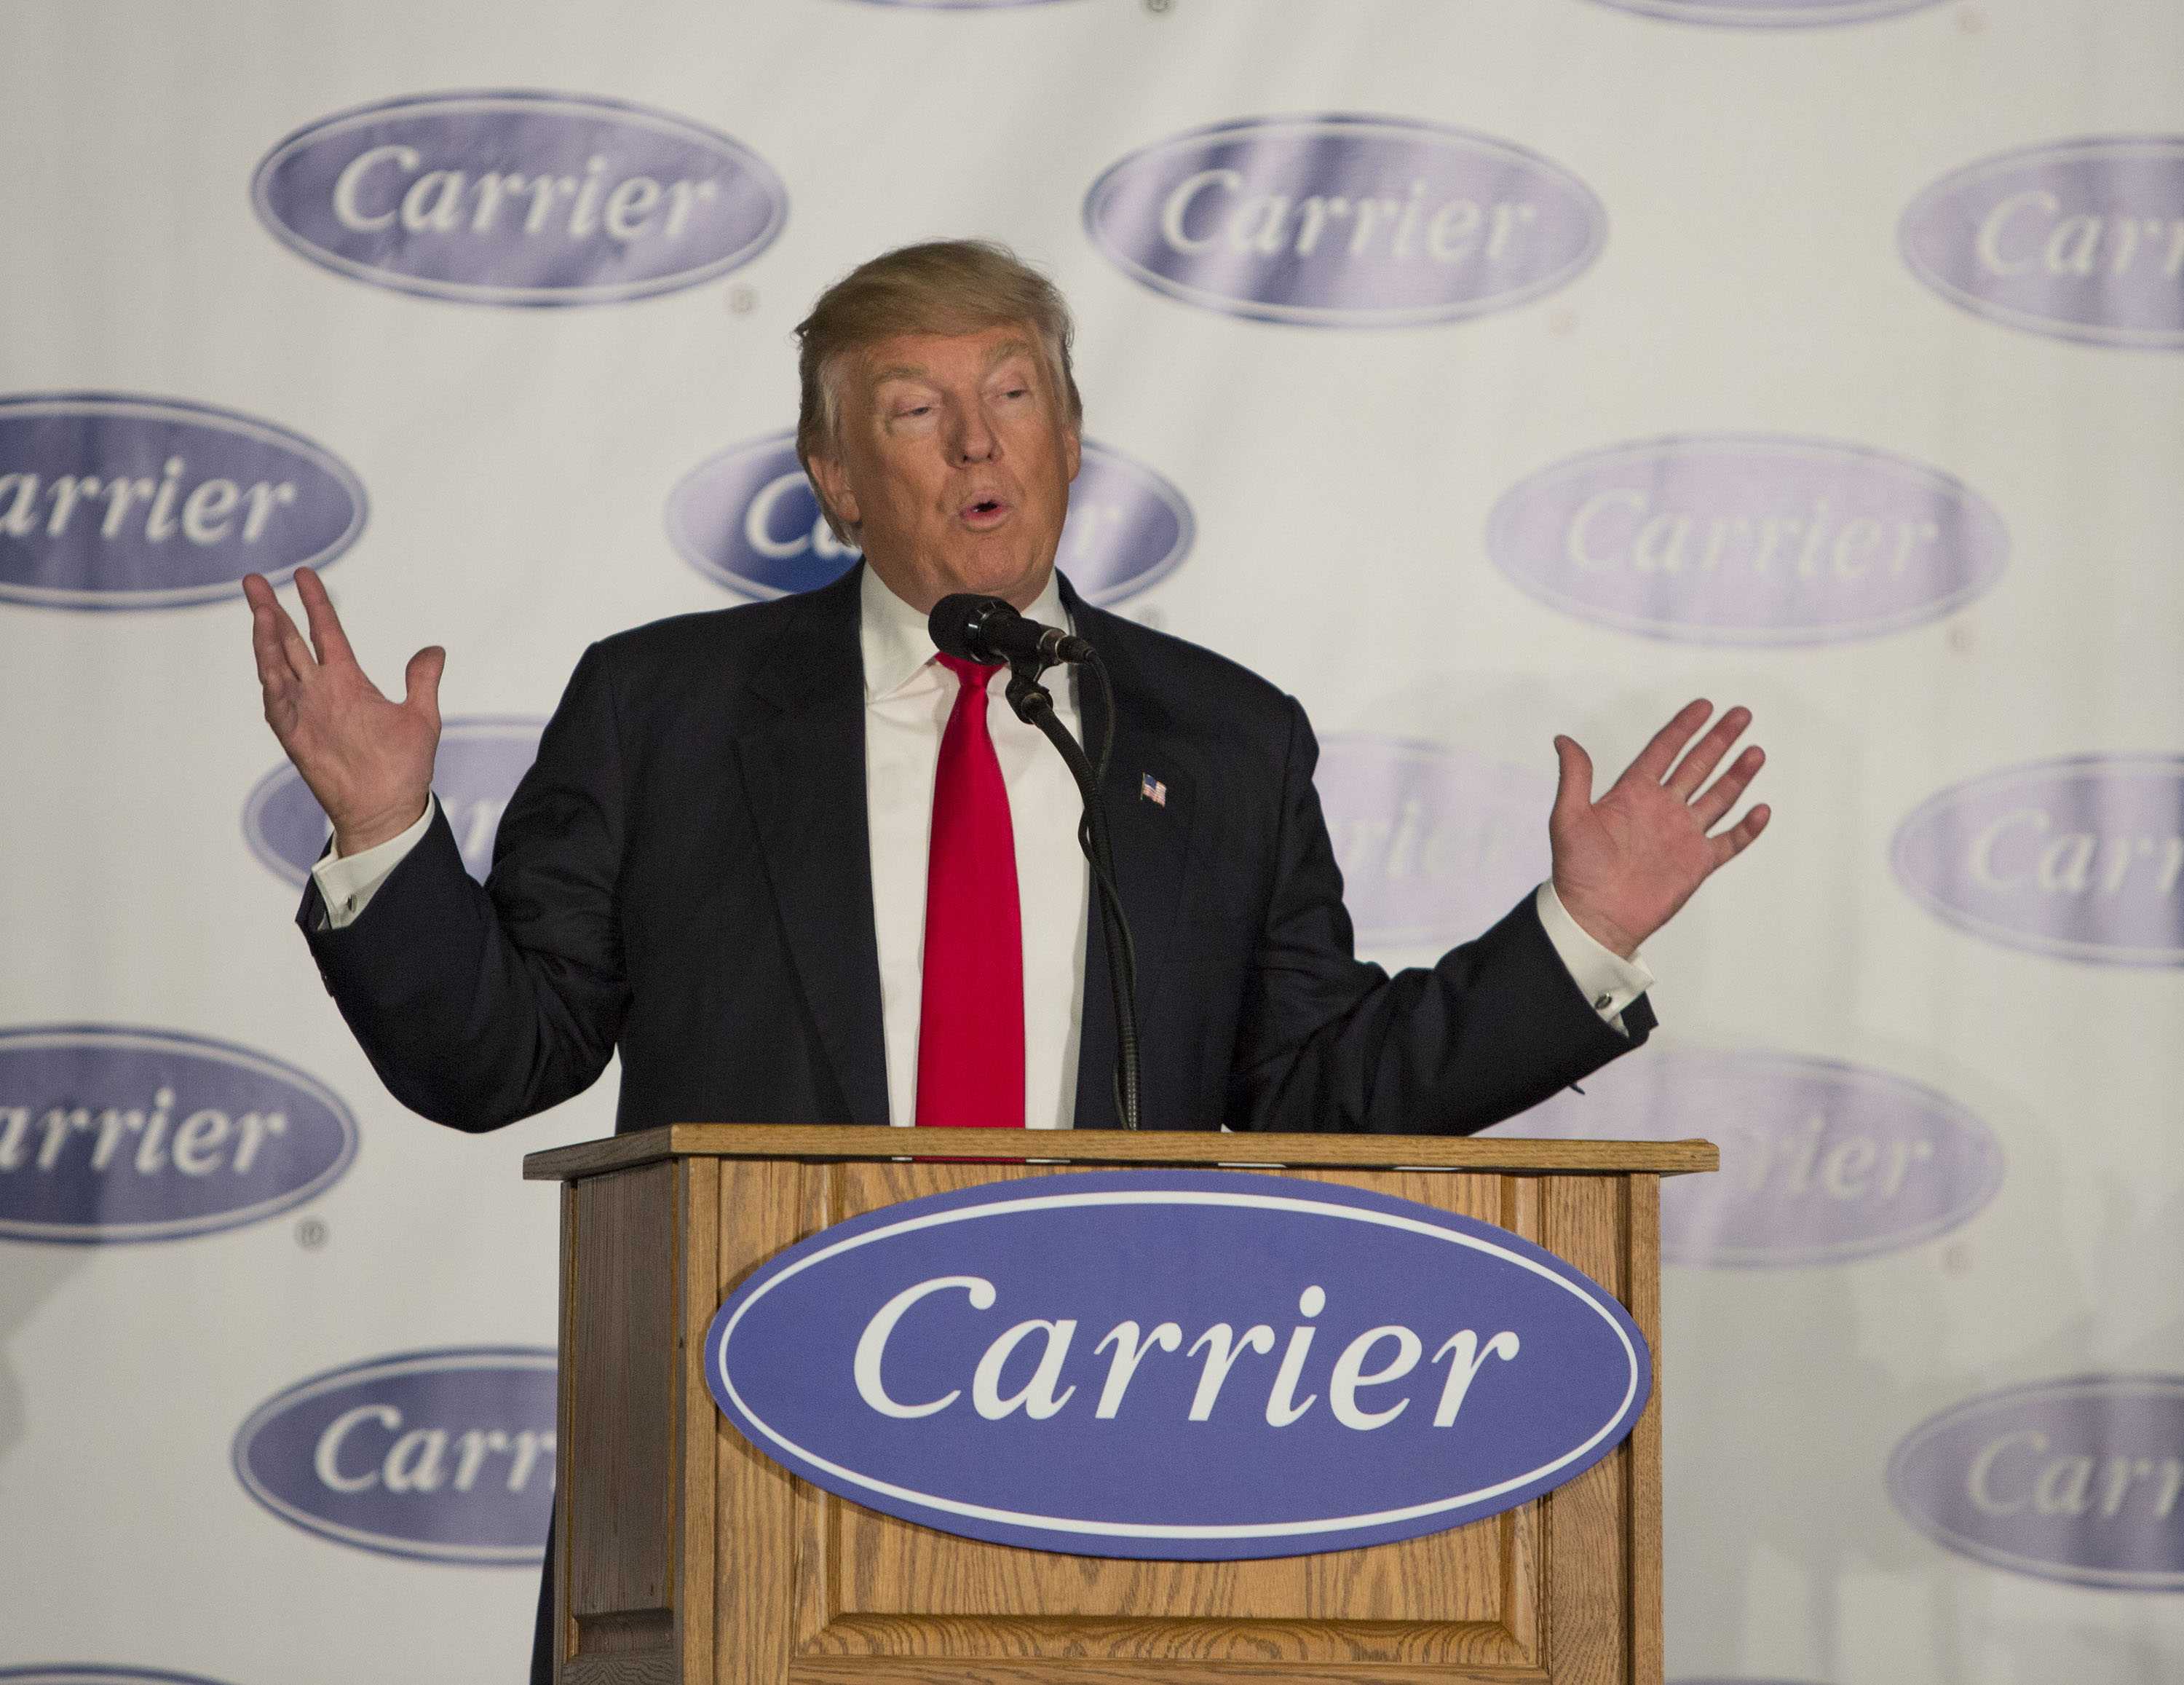 donald trump speaks at the podium for an event hosted by the company carrier